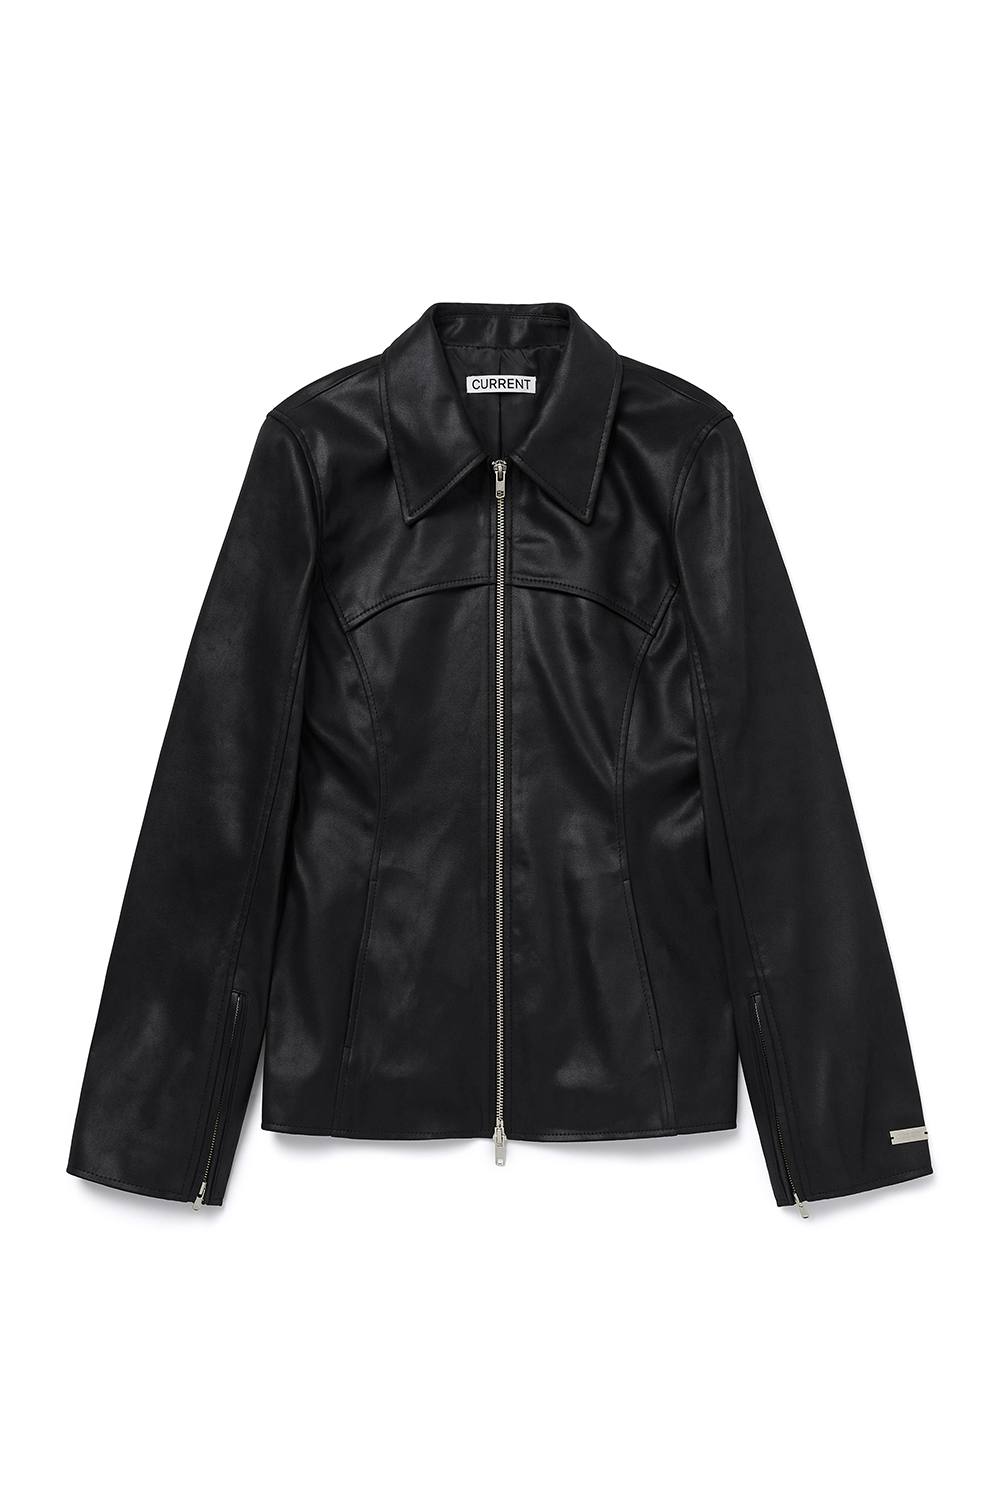 FITTED CRACK LEATHER JACKET [BLACK]		